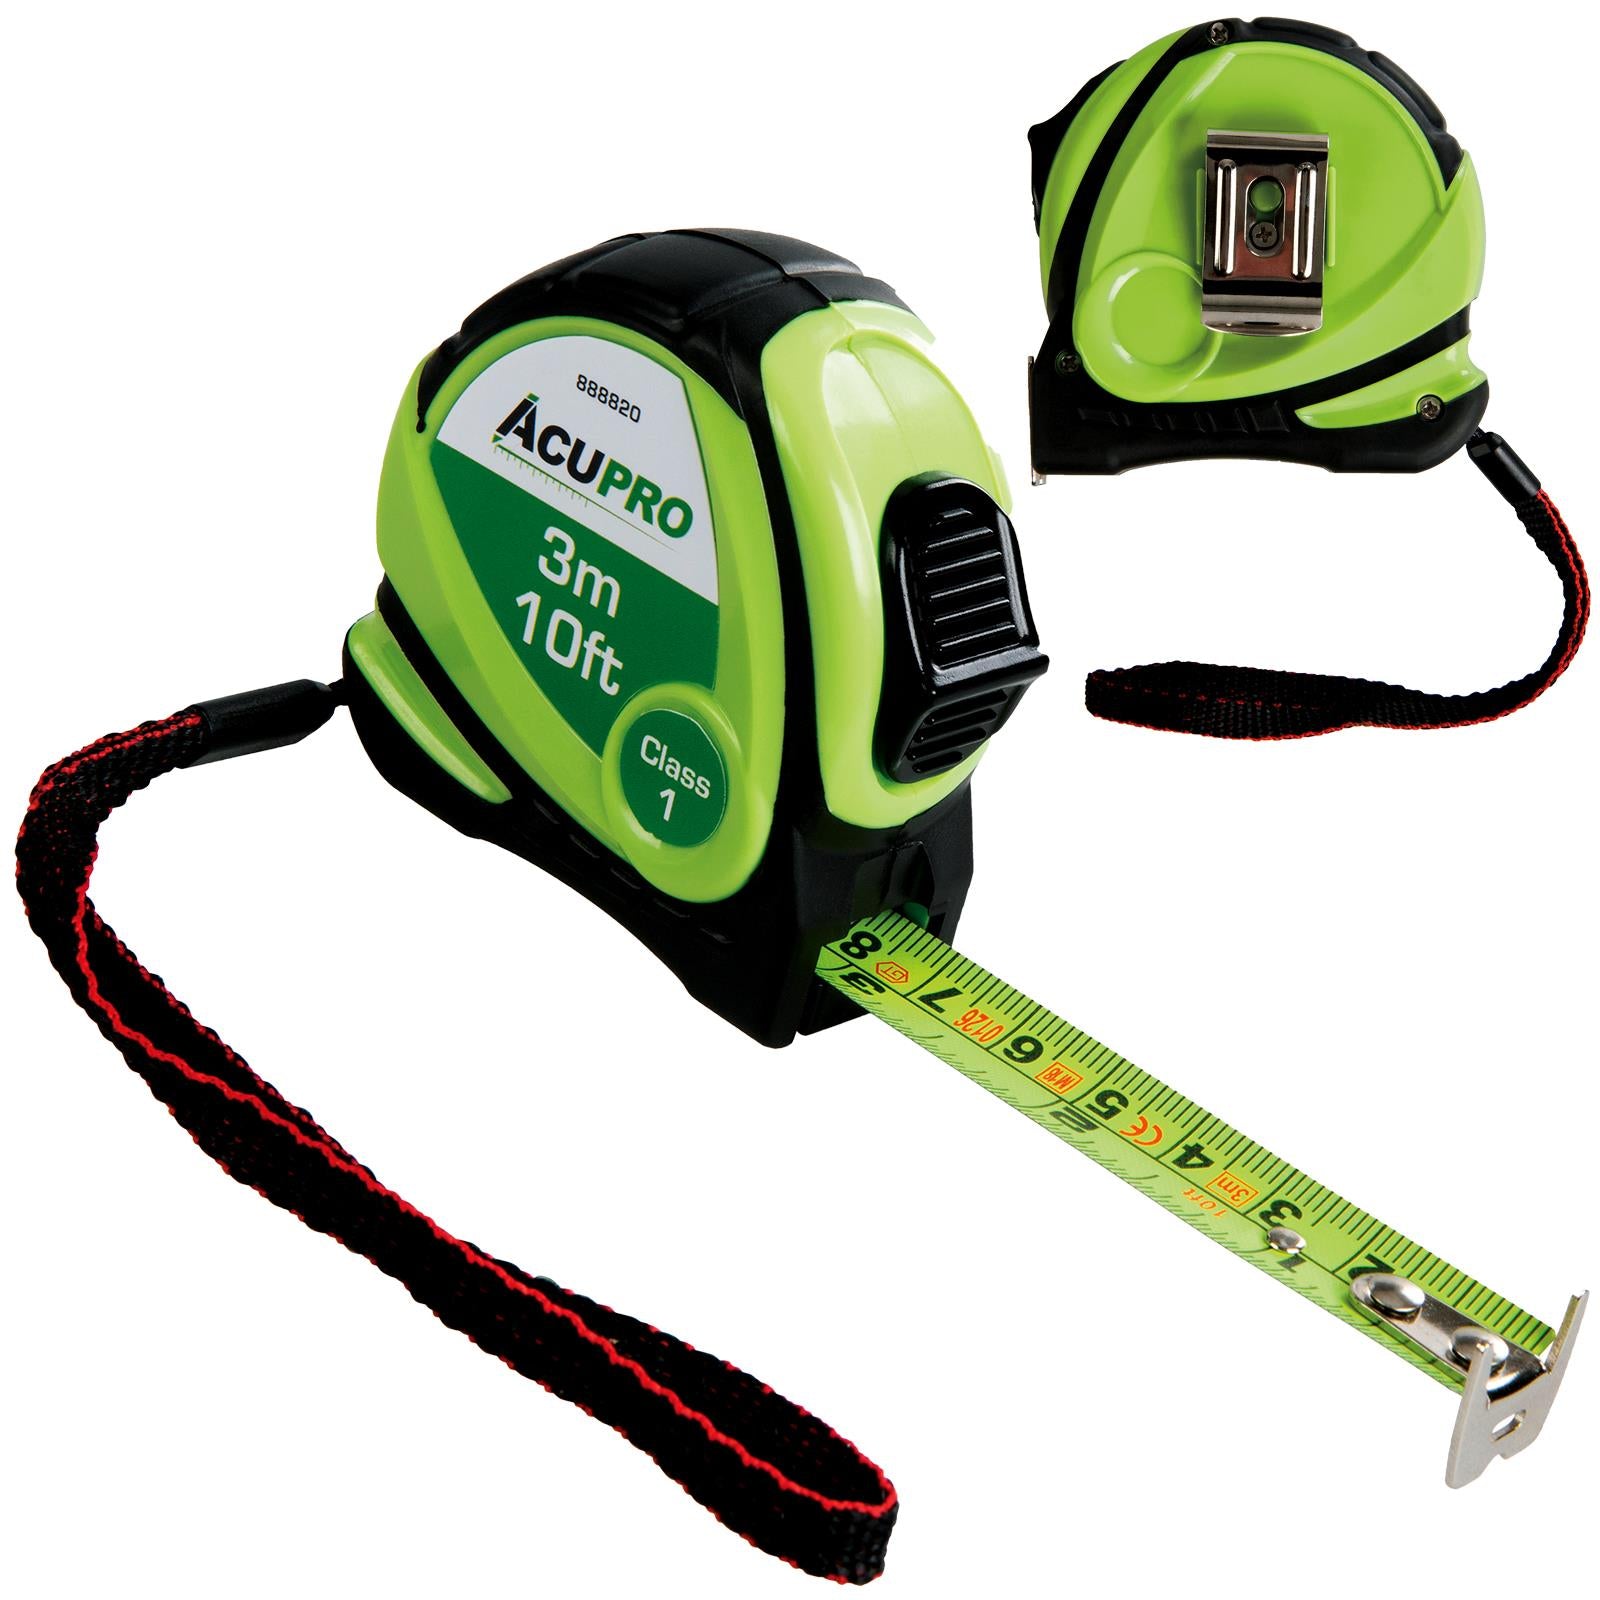 Acupro 3m 5m 8m Tape Measure Class 1 Accuracy Highest Available